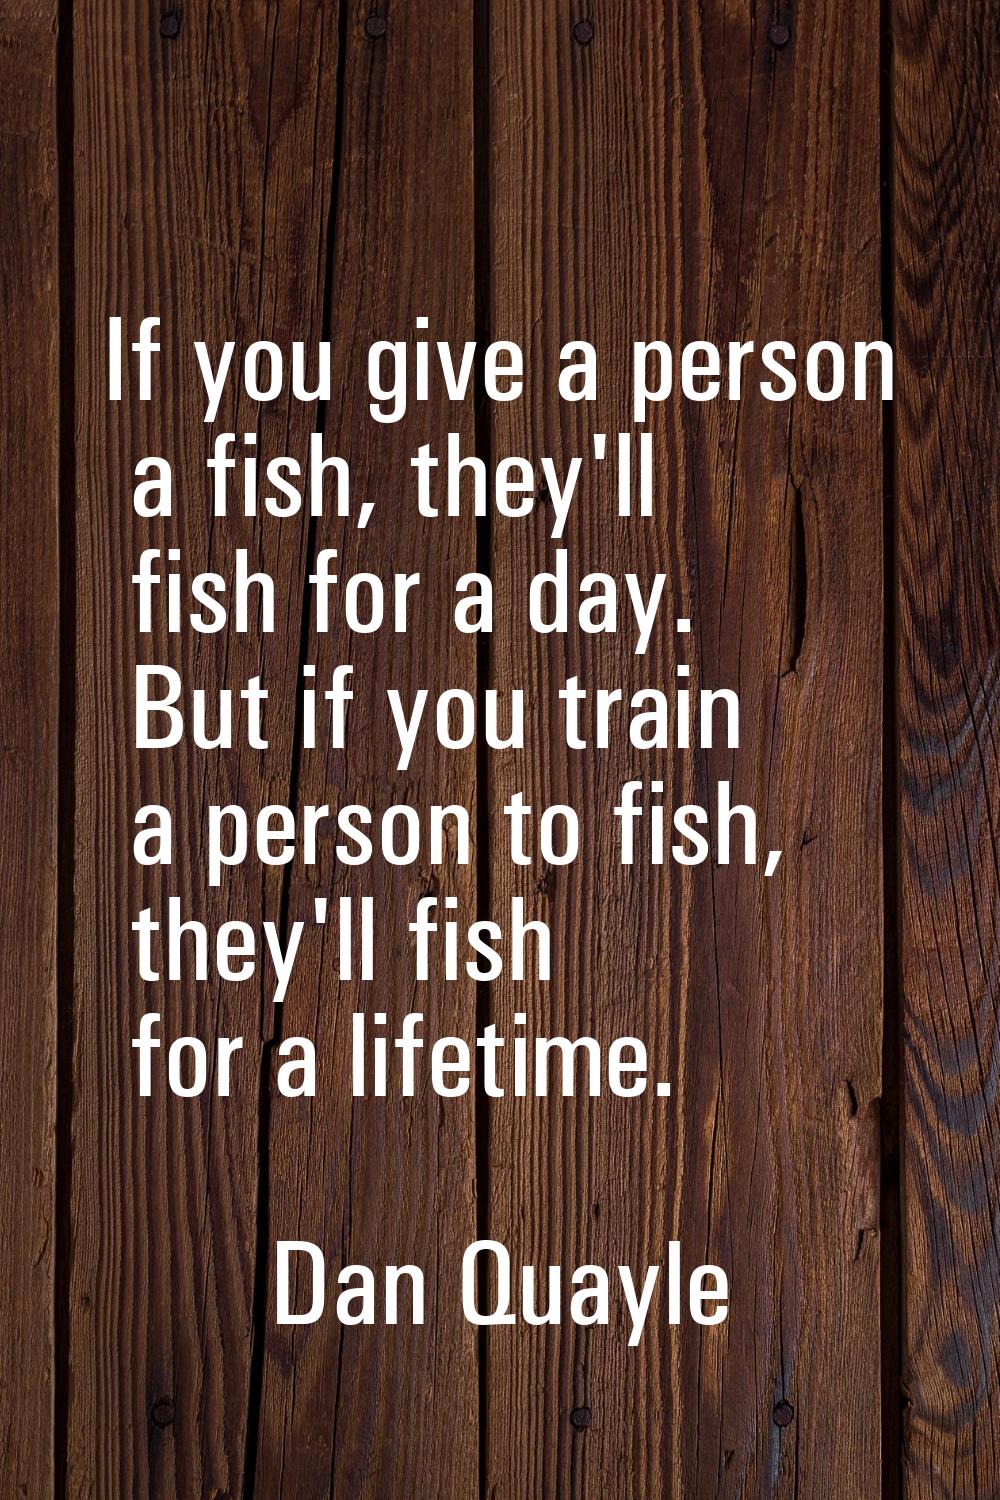 If you give a person a fish, they'll fish for a day. But if you train a person to fish, they'll fis